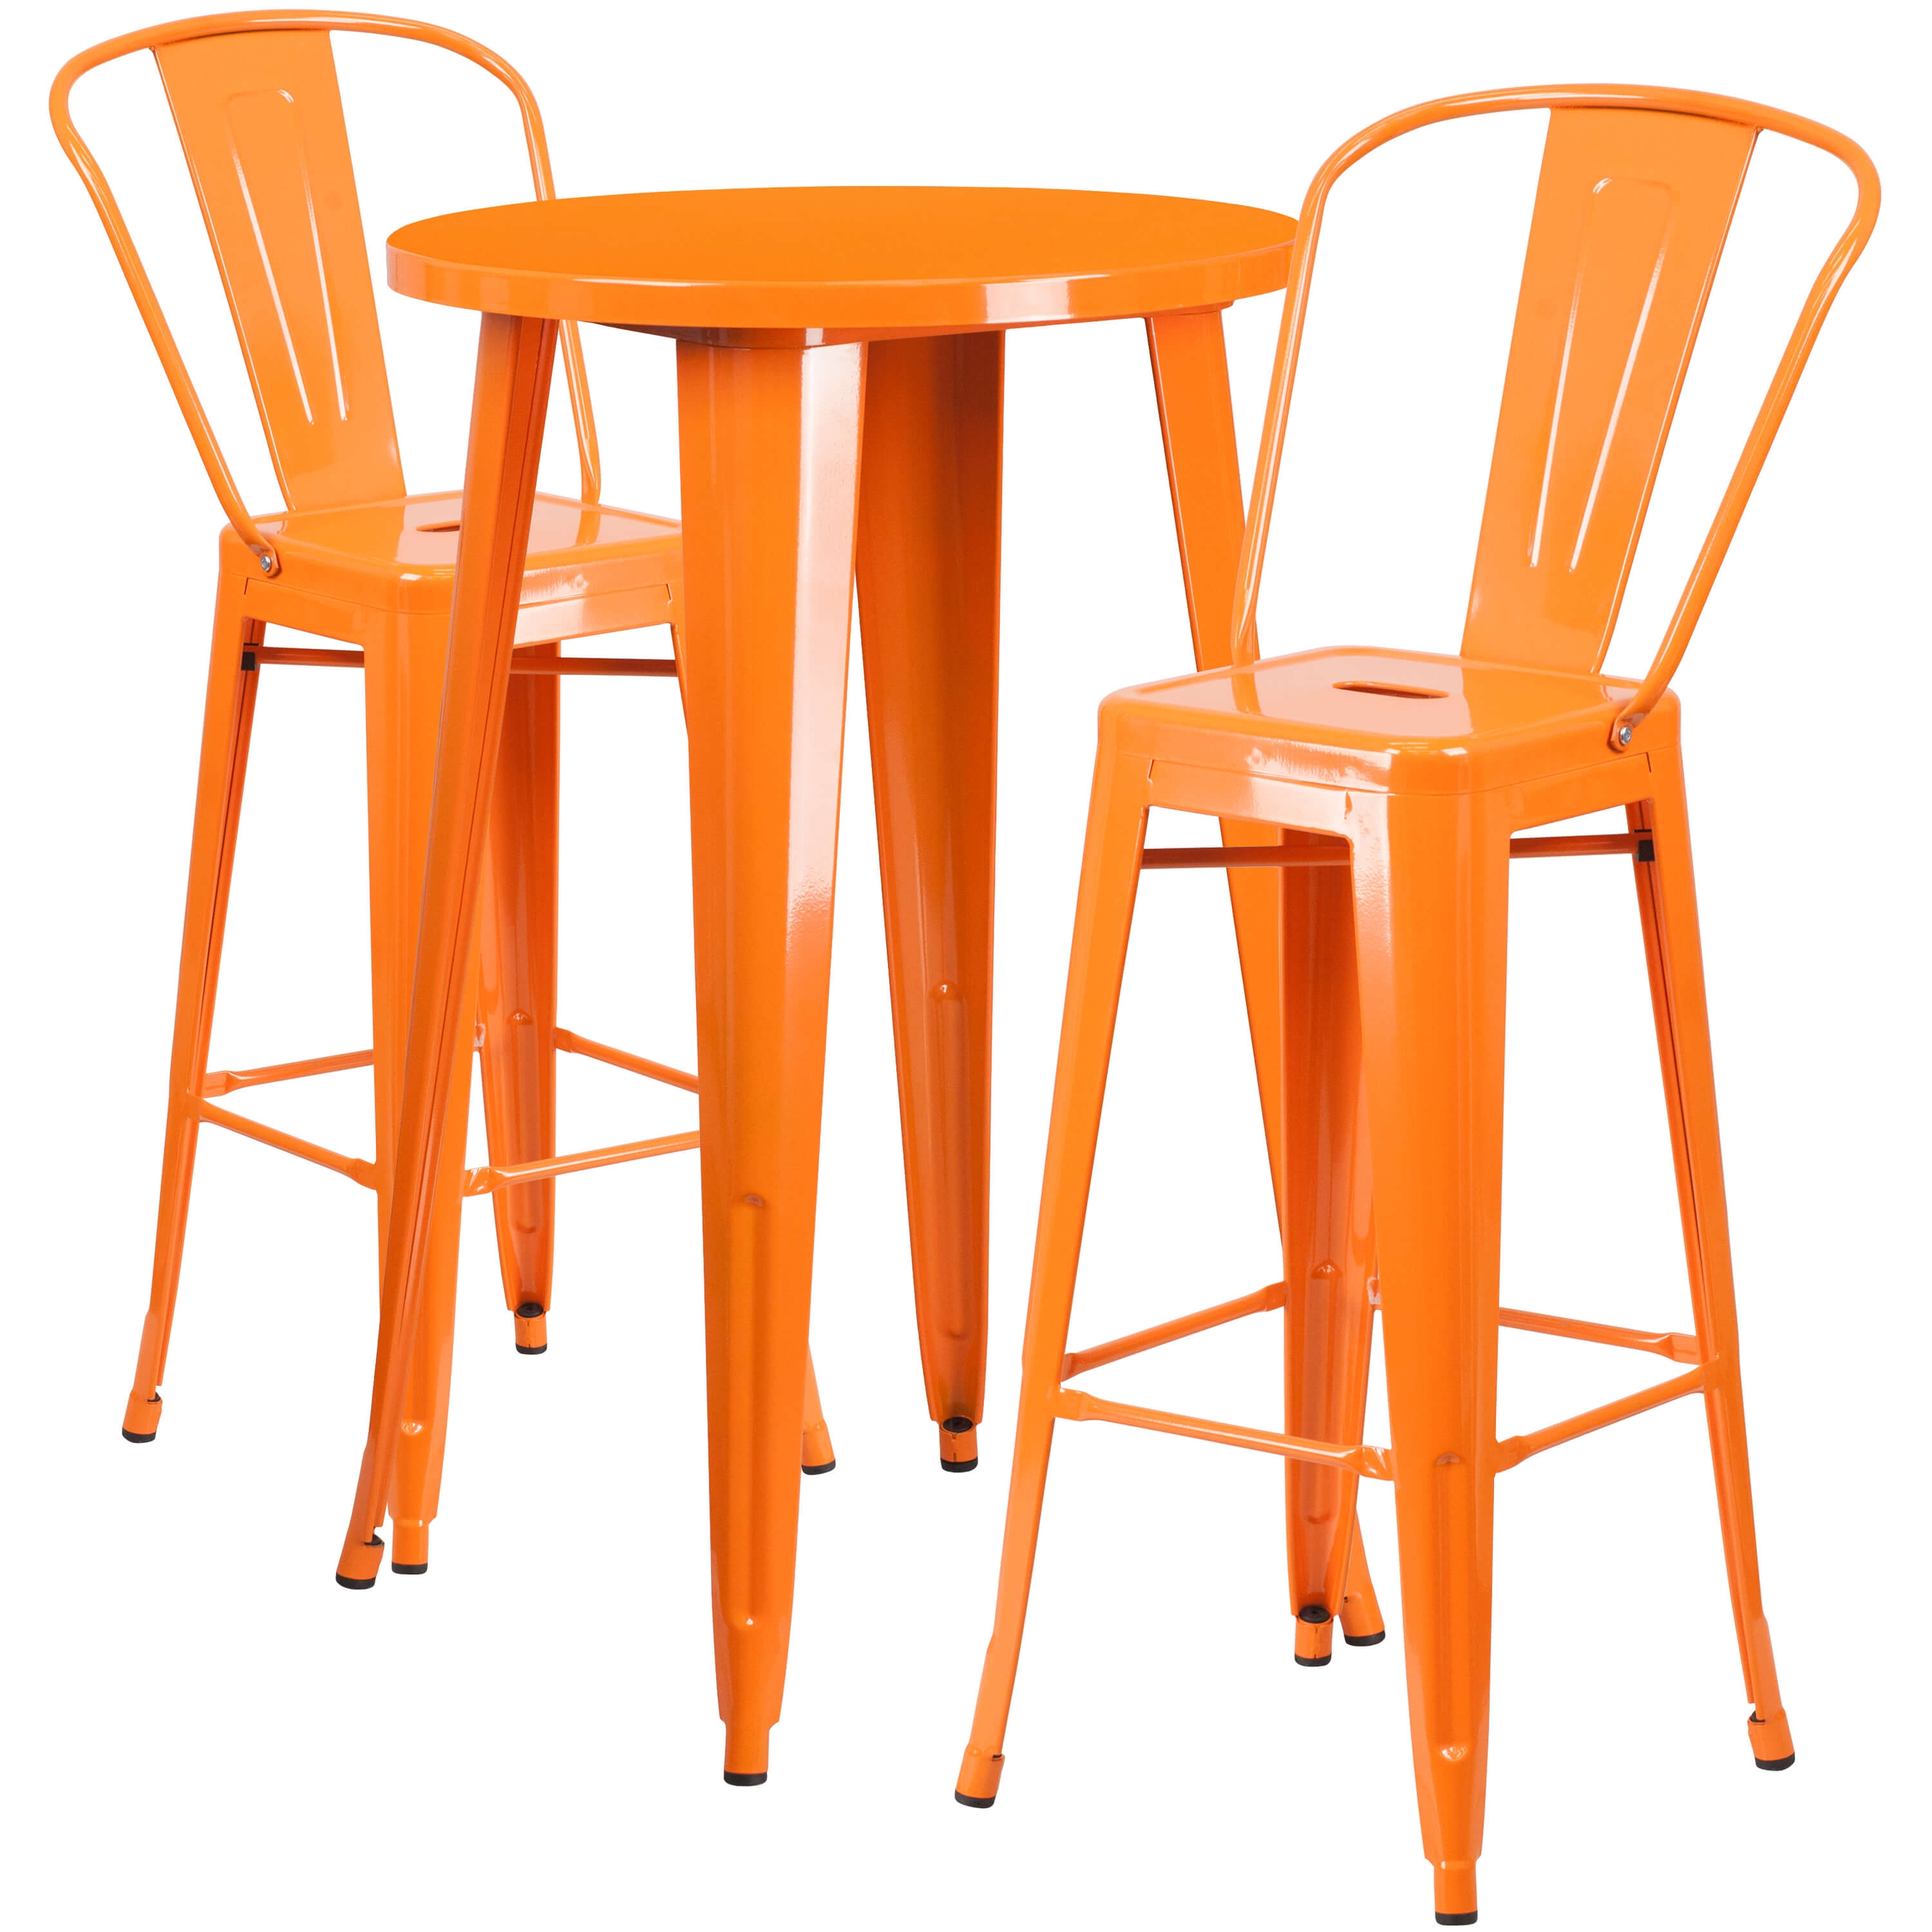 cafe-tables-and-chairs-bar-height-bistro-patio-set.jpg